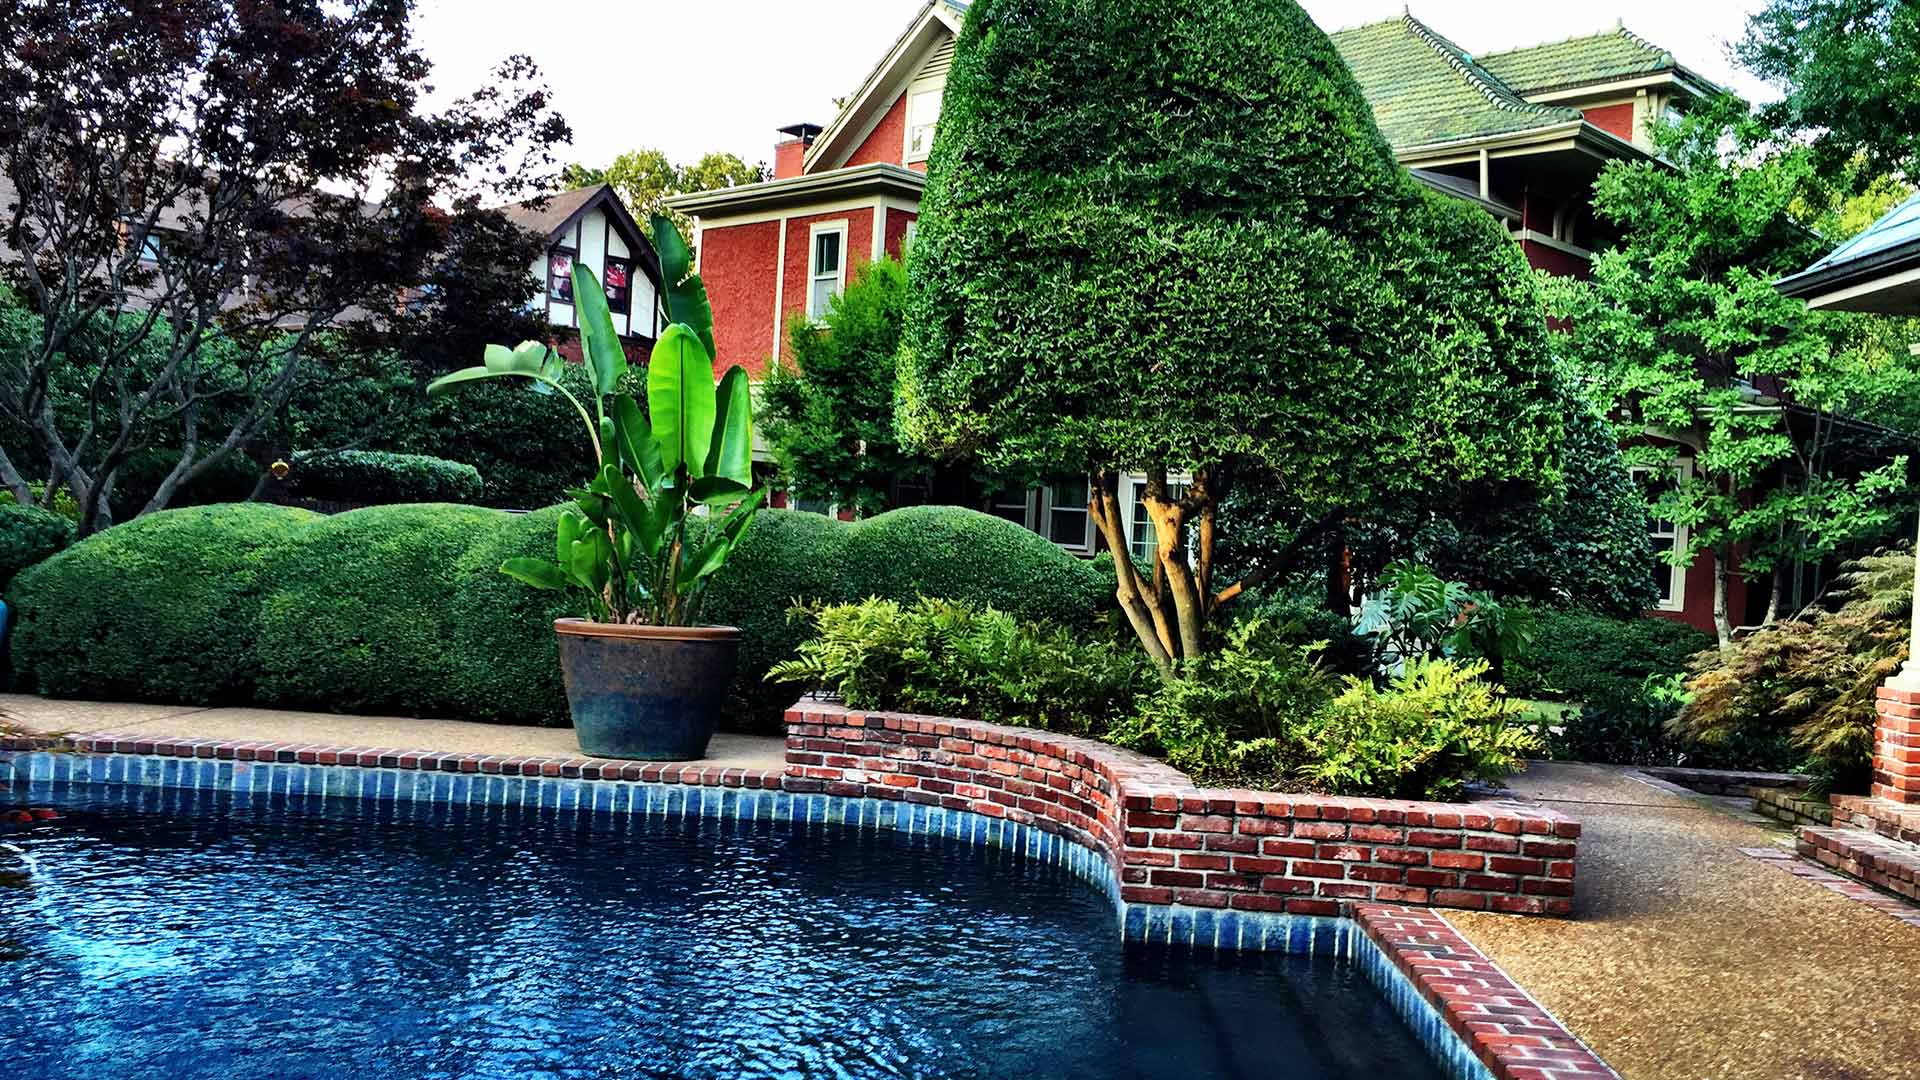 Trimmed landscape bushes and hedges around a pool in Collierville, TN.